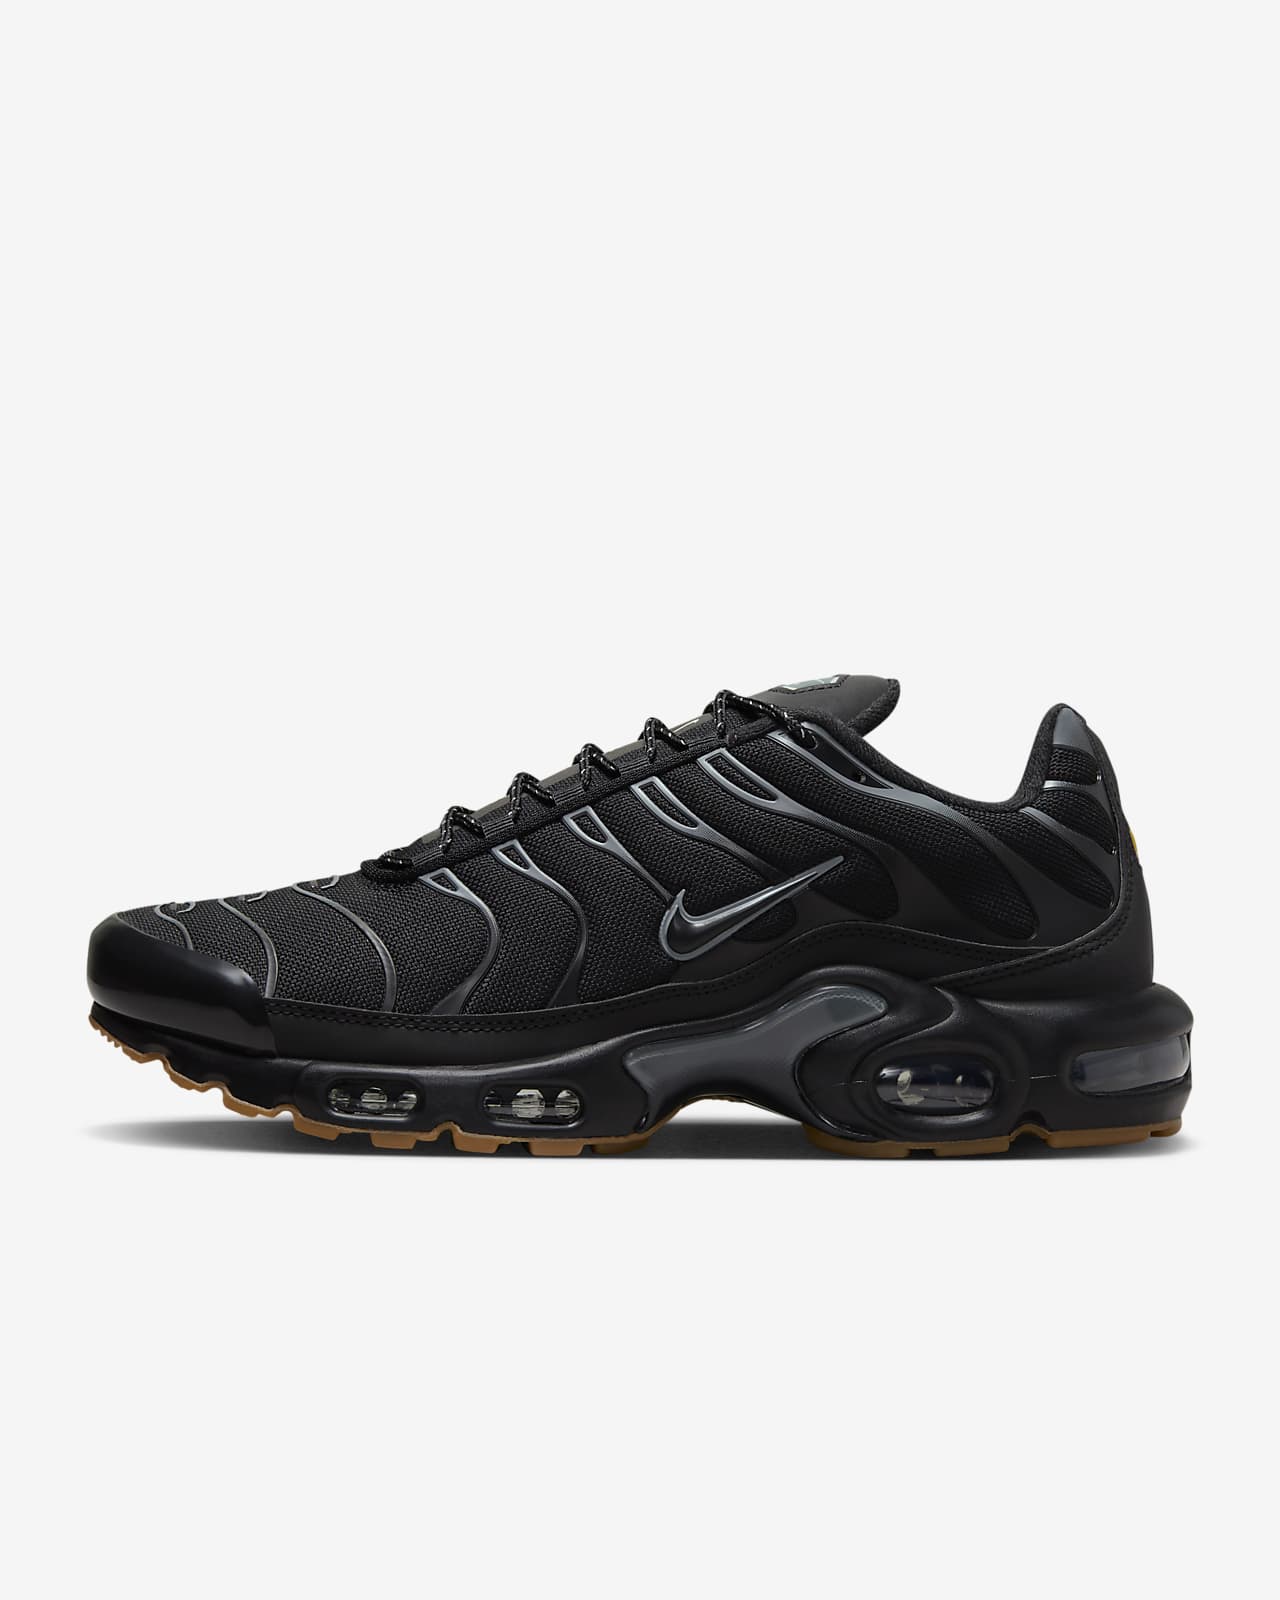 https://static.nike.com/a/images/t_PDP_1280_v1/f_auto,q_auto:eco/c5acc3f1-b2c3-4279-ad0d-02e57209c784/air-max-plus-shoes-NGVWHC.png